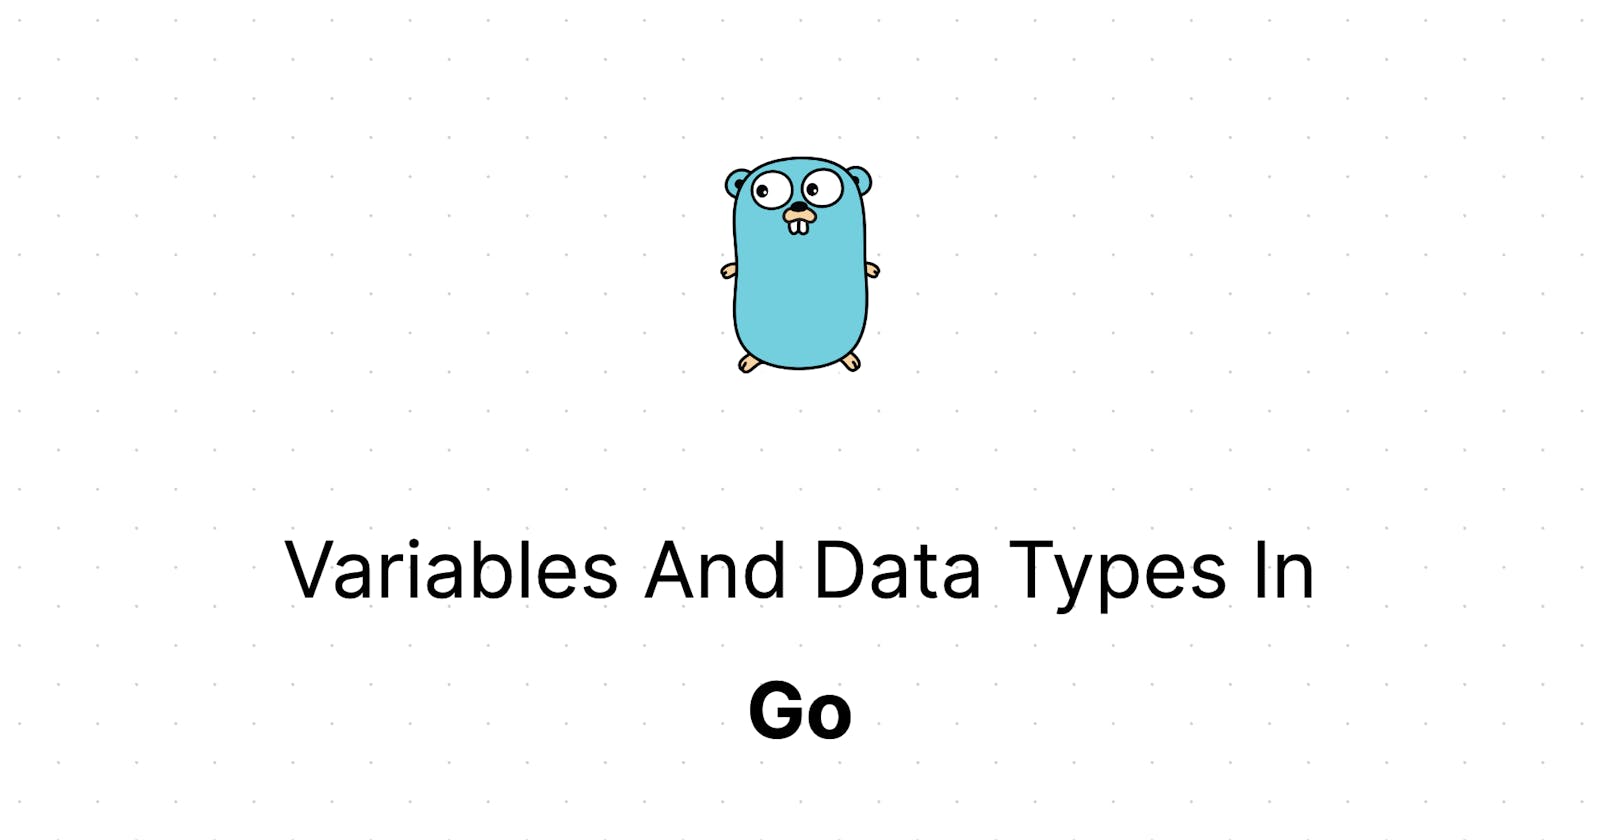 Variables And Data Types In Go